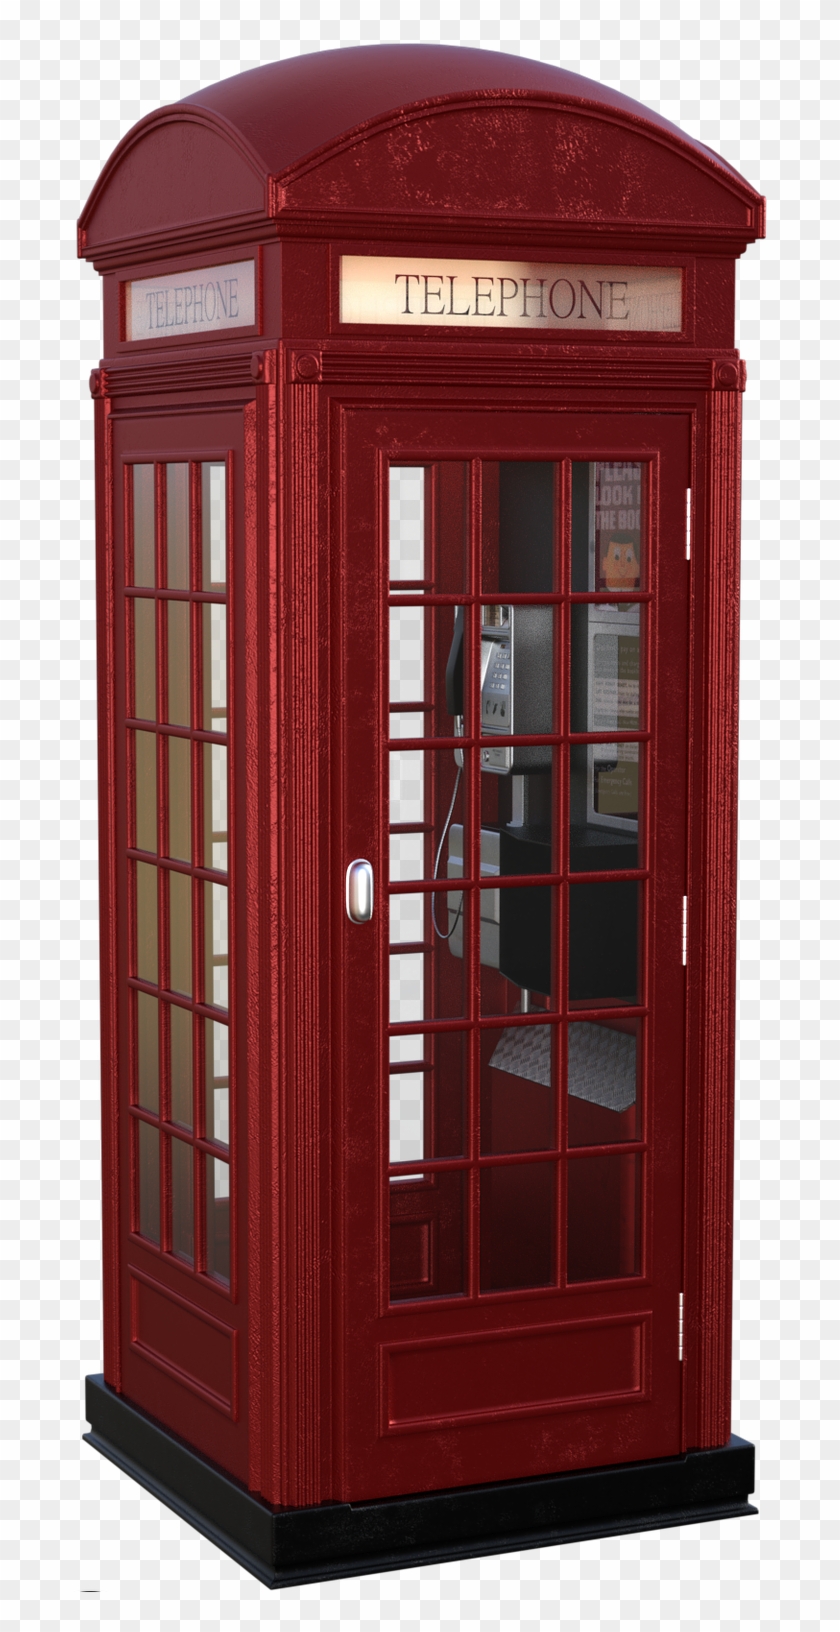 Neon Phone Box Telephone Booth Hd Png Download 929x1602 4593060 Pngfind - phone booth roblox